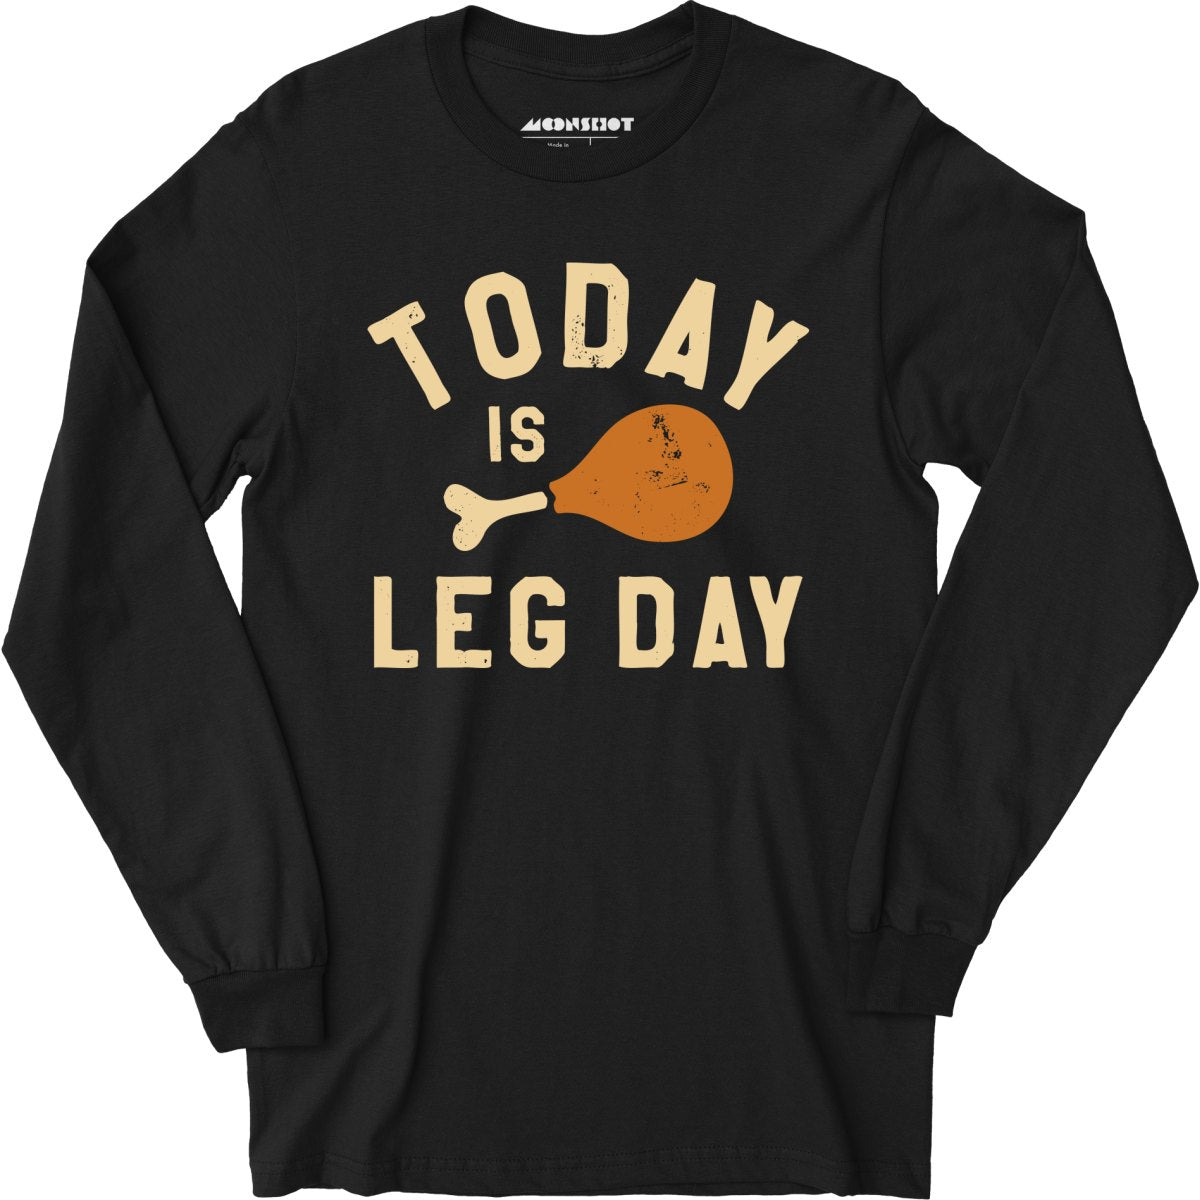 Today is Leg Day - Long Sleeve T-Shirt